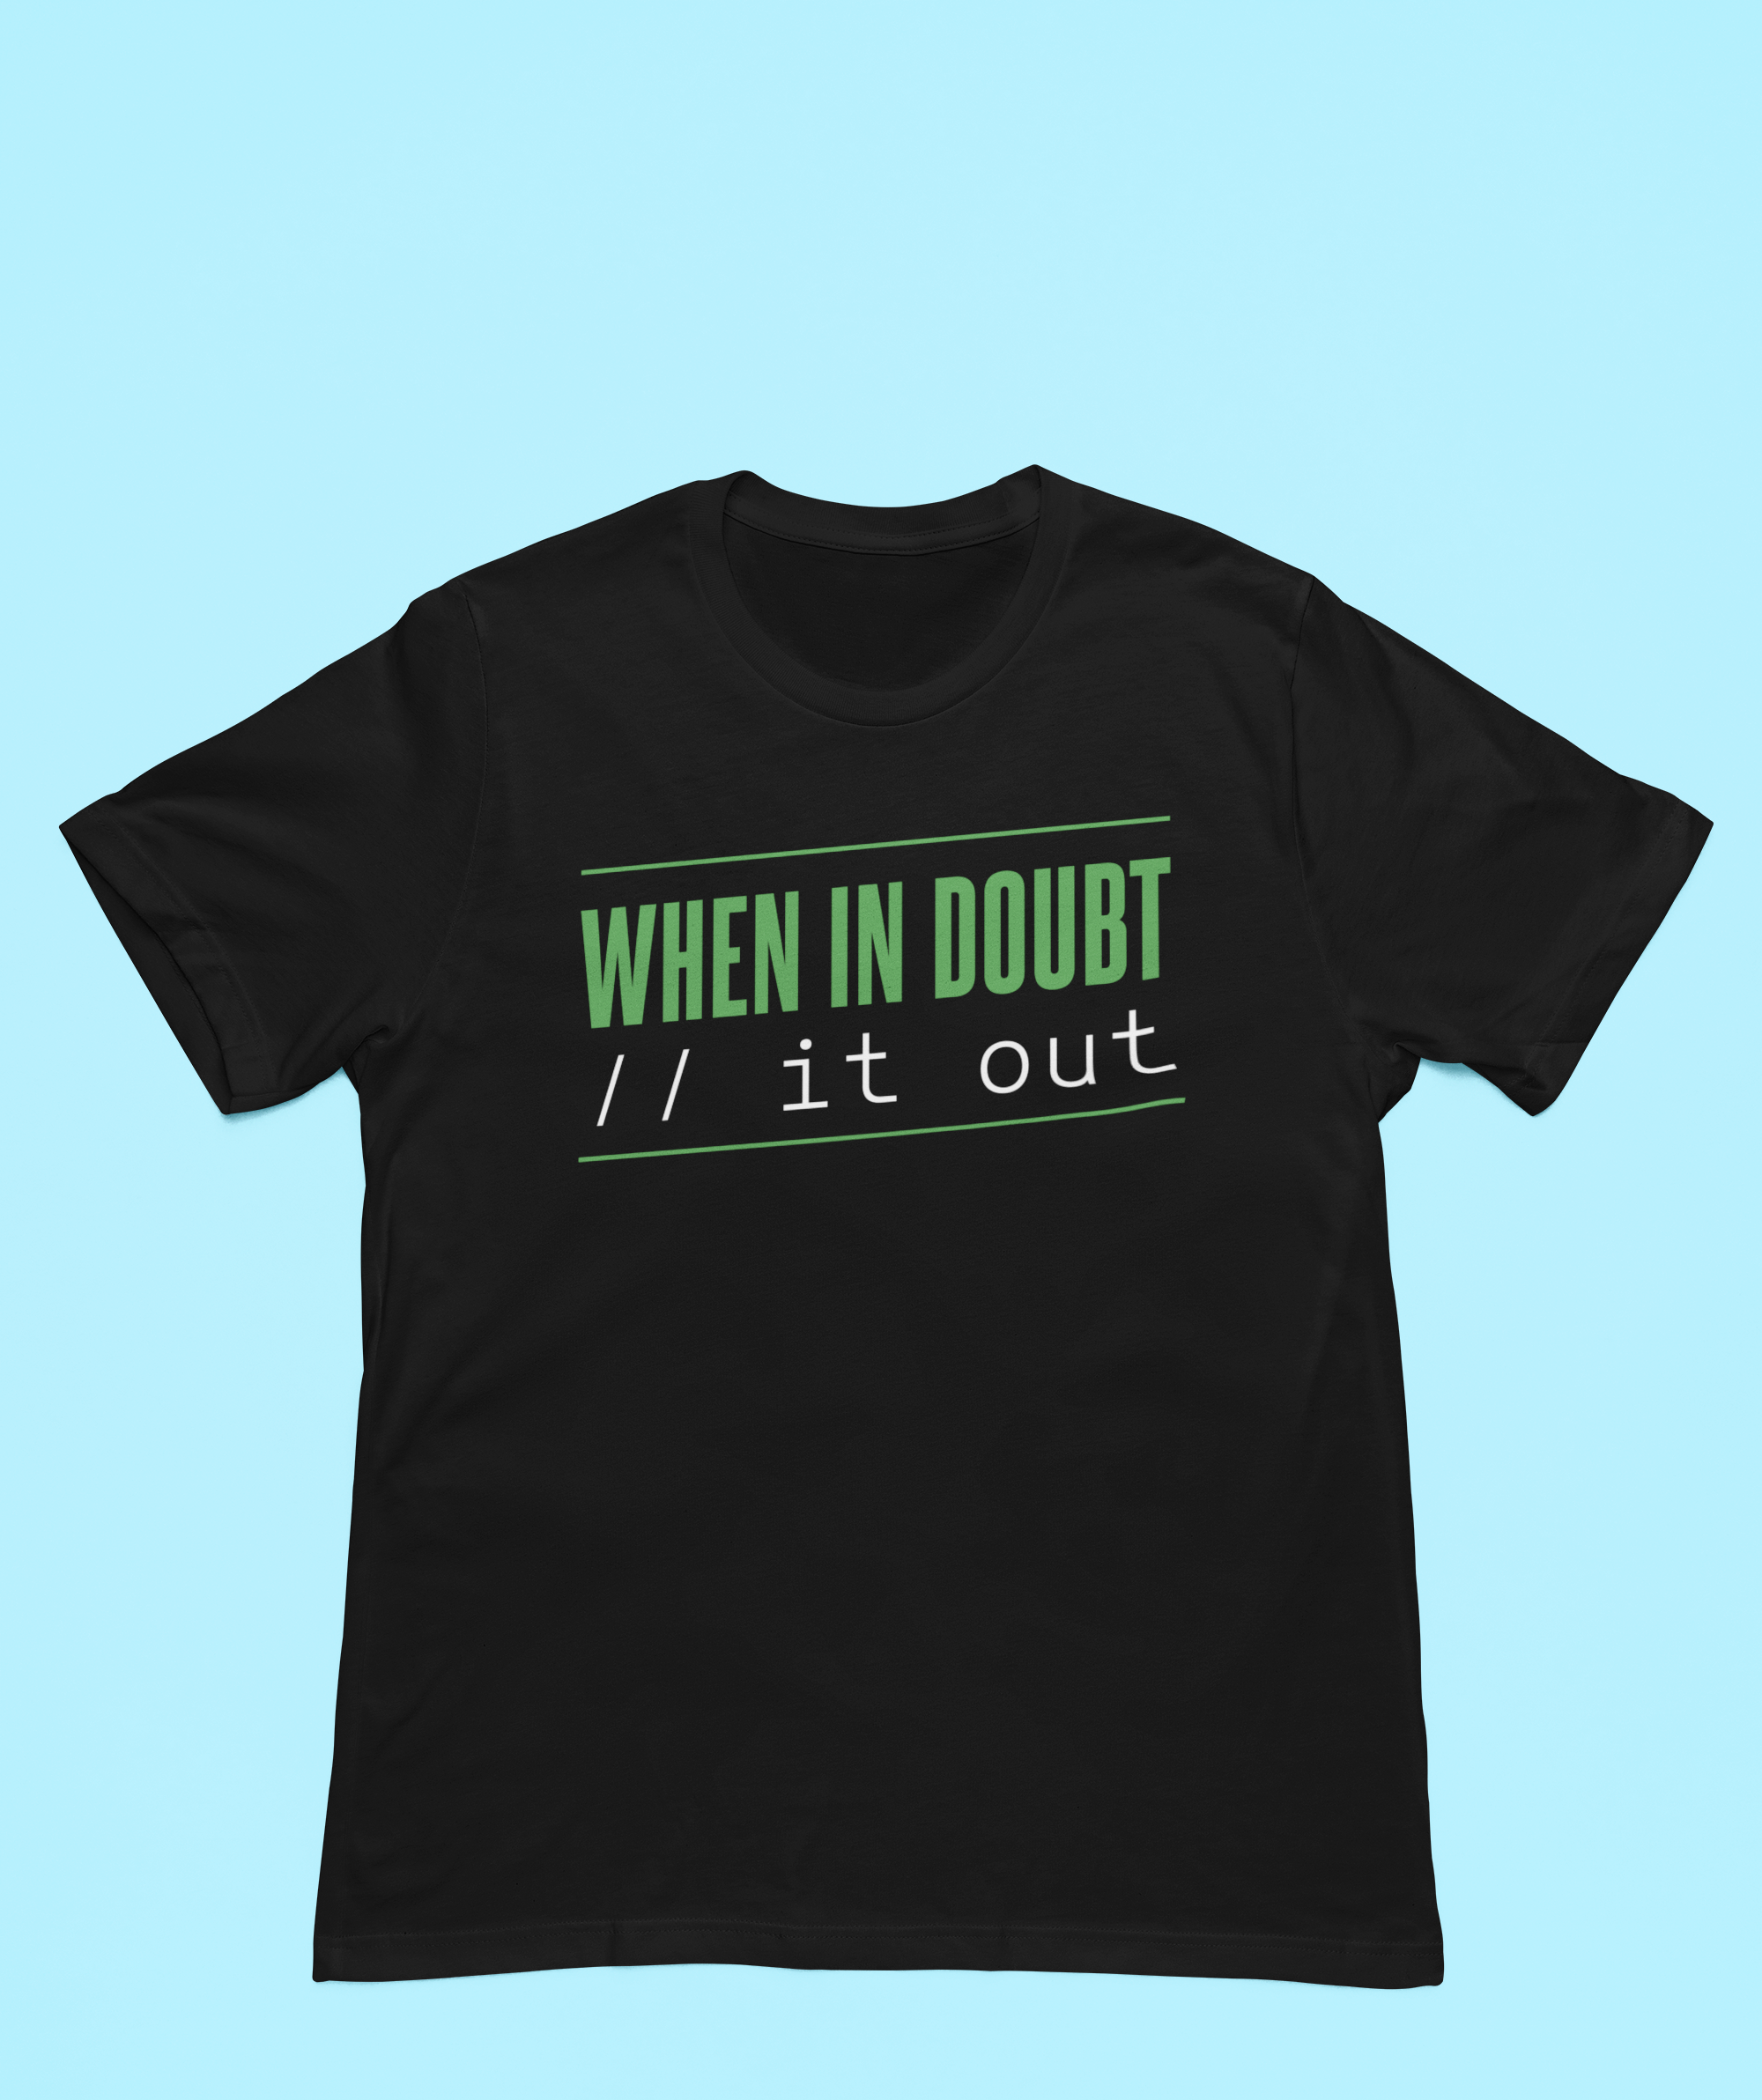 Talk Data to me T-Shirt with the text "when in doubt // data-driven it out" printed in green and white.